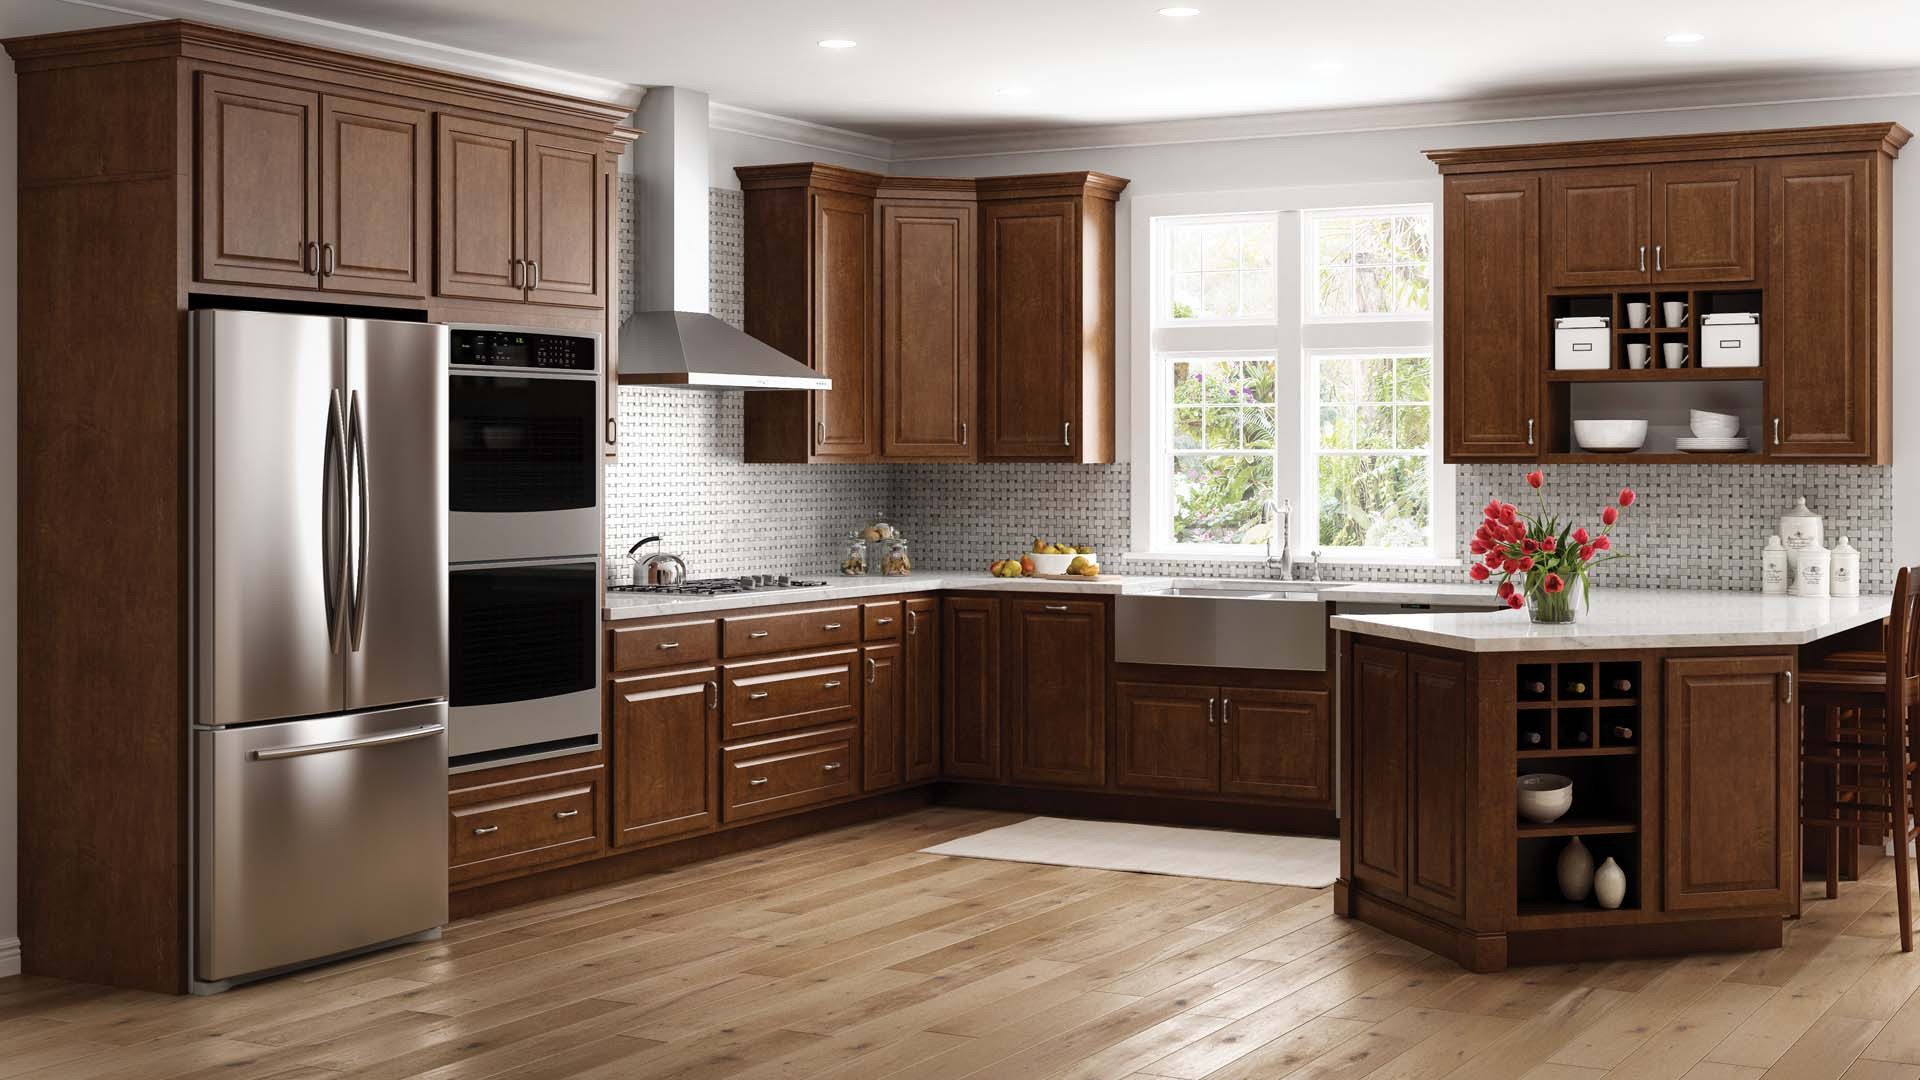 Homedepot Kitchen Cabinets
 Home Depot Kitchen Cabinets Stock Image to u